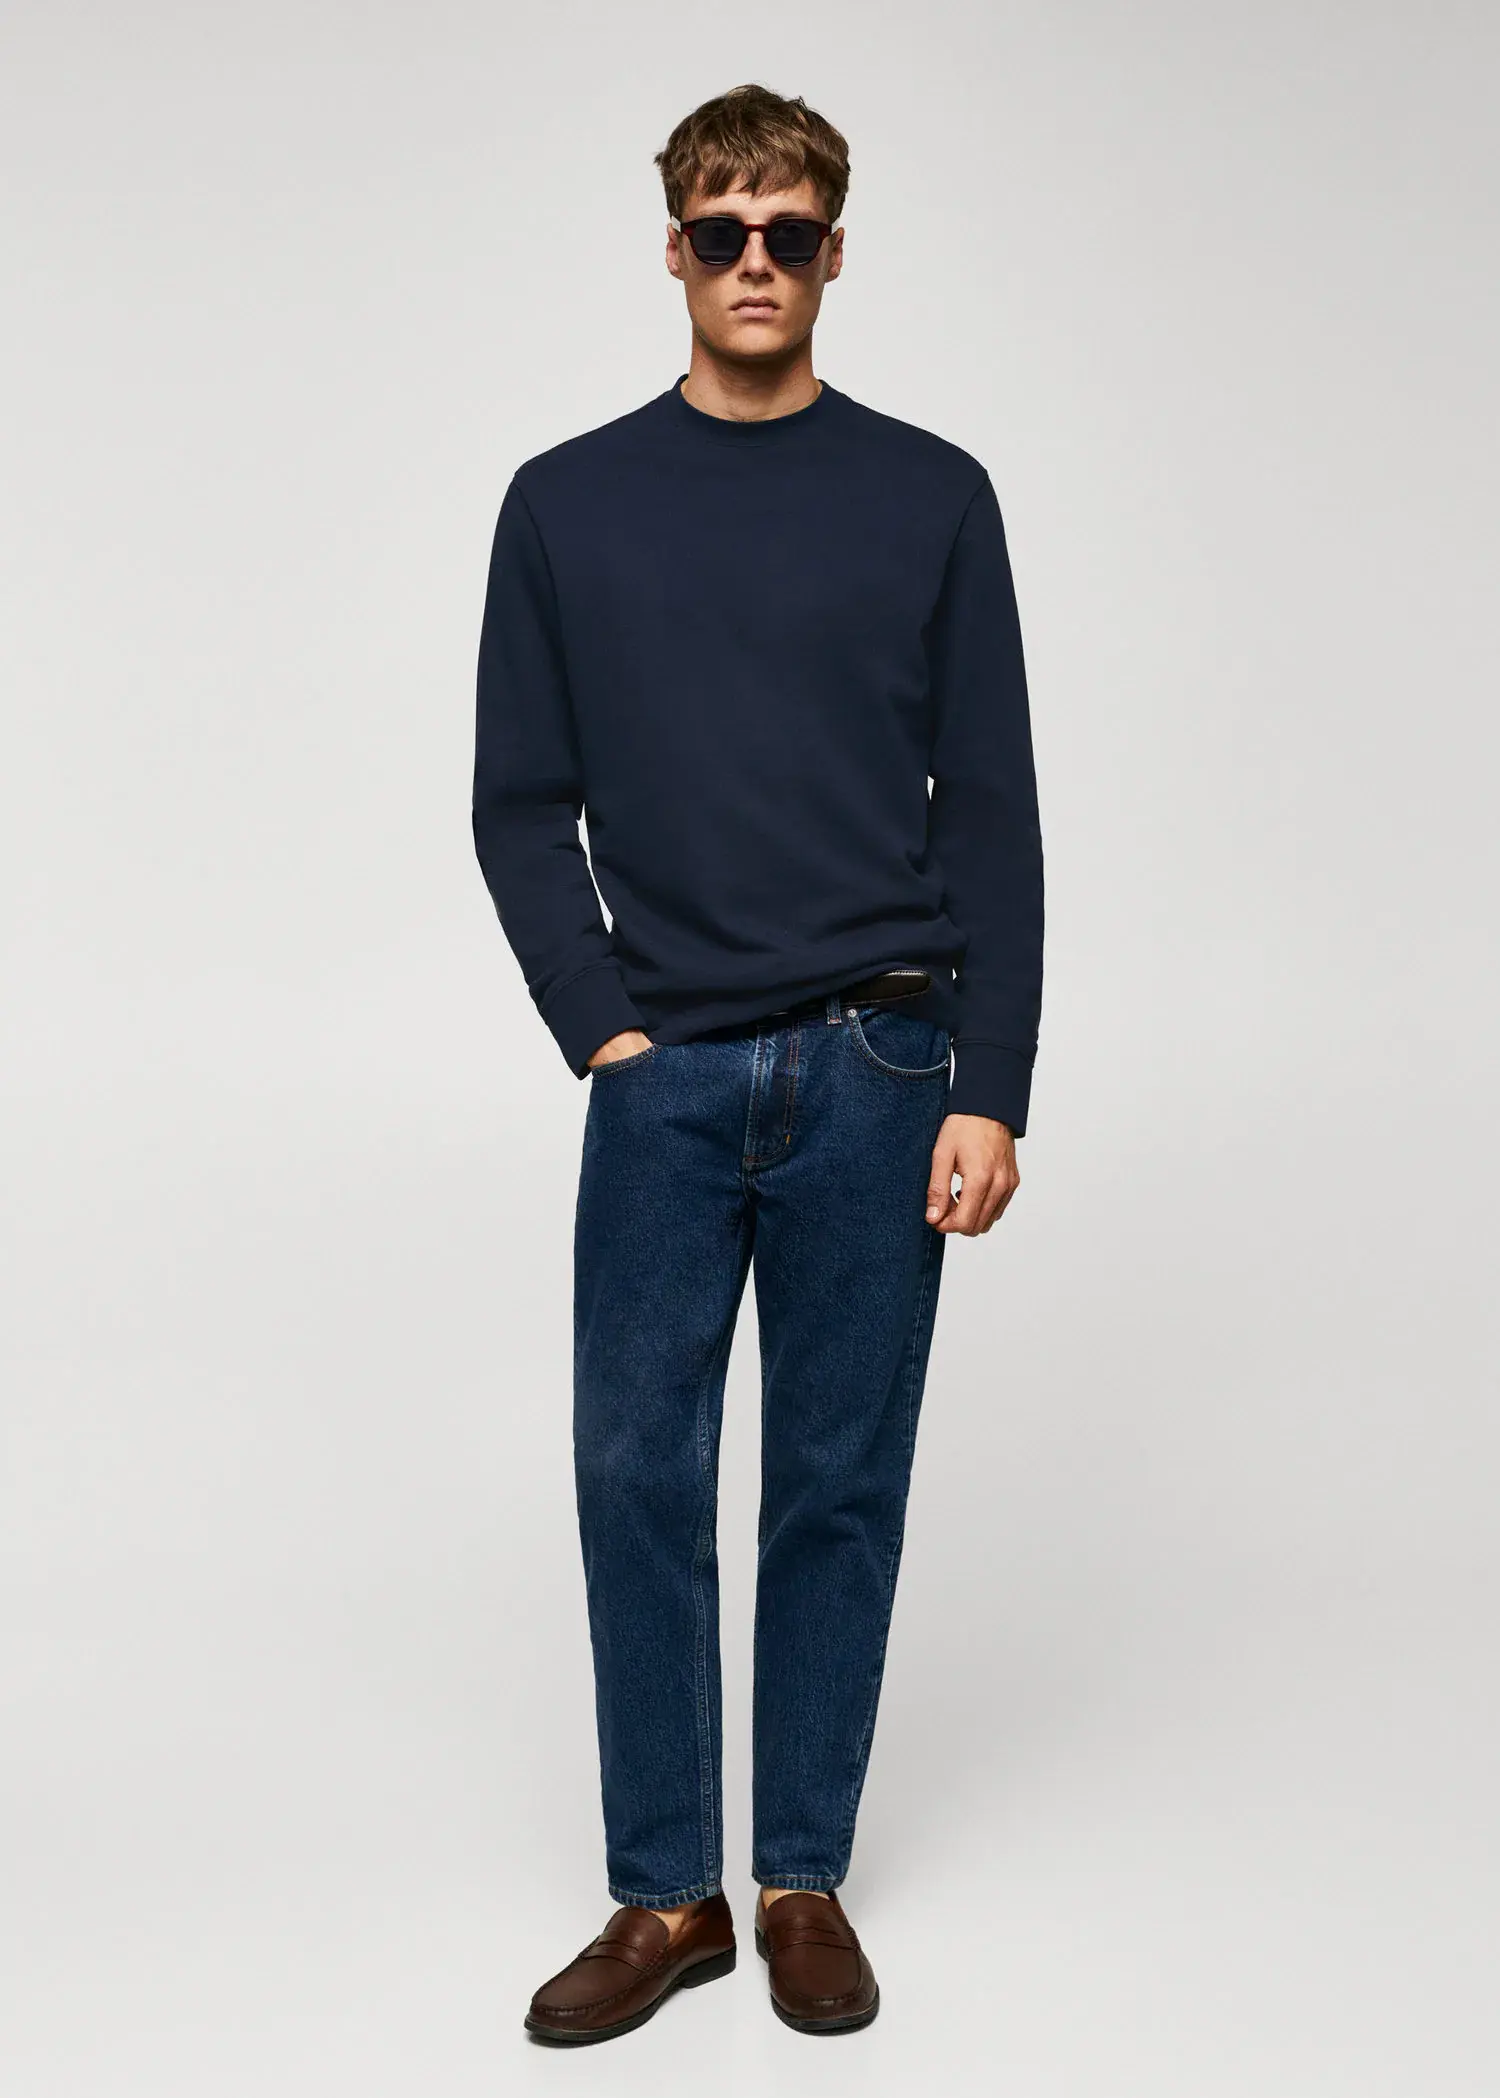 Mango 100% cotton basic sweatshirt . a man in a black sweater and blue jeans. 